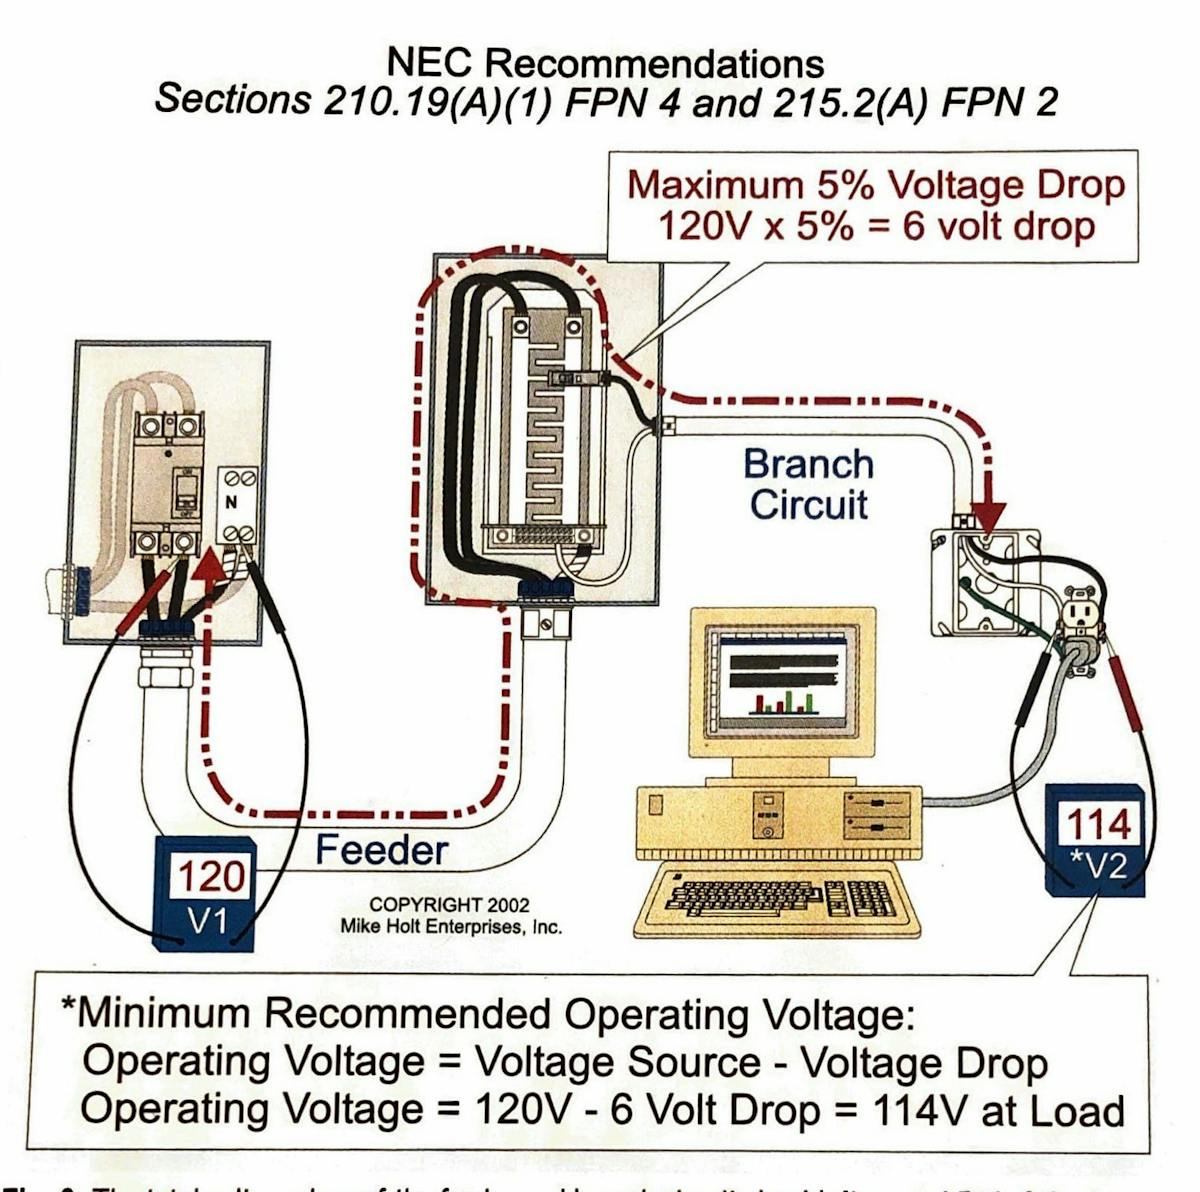 Fig. 2. The total voltage drop of the feeder and branch circuit shouldn&rsquo;t exceed 5% of the source.